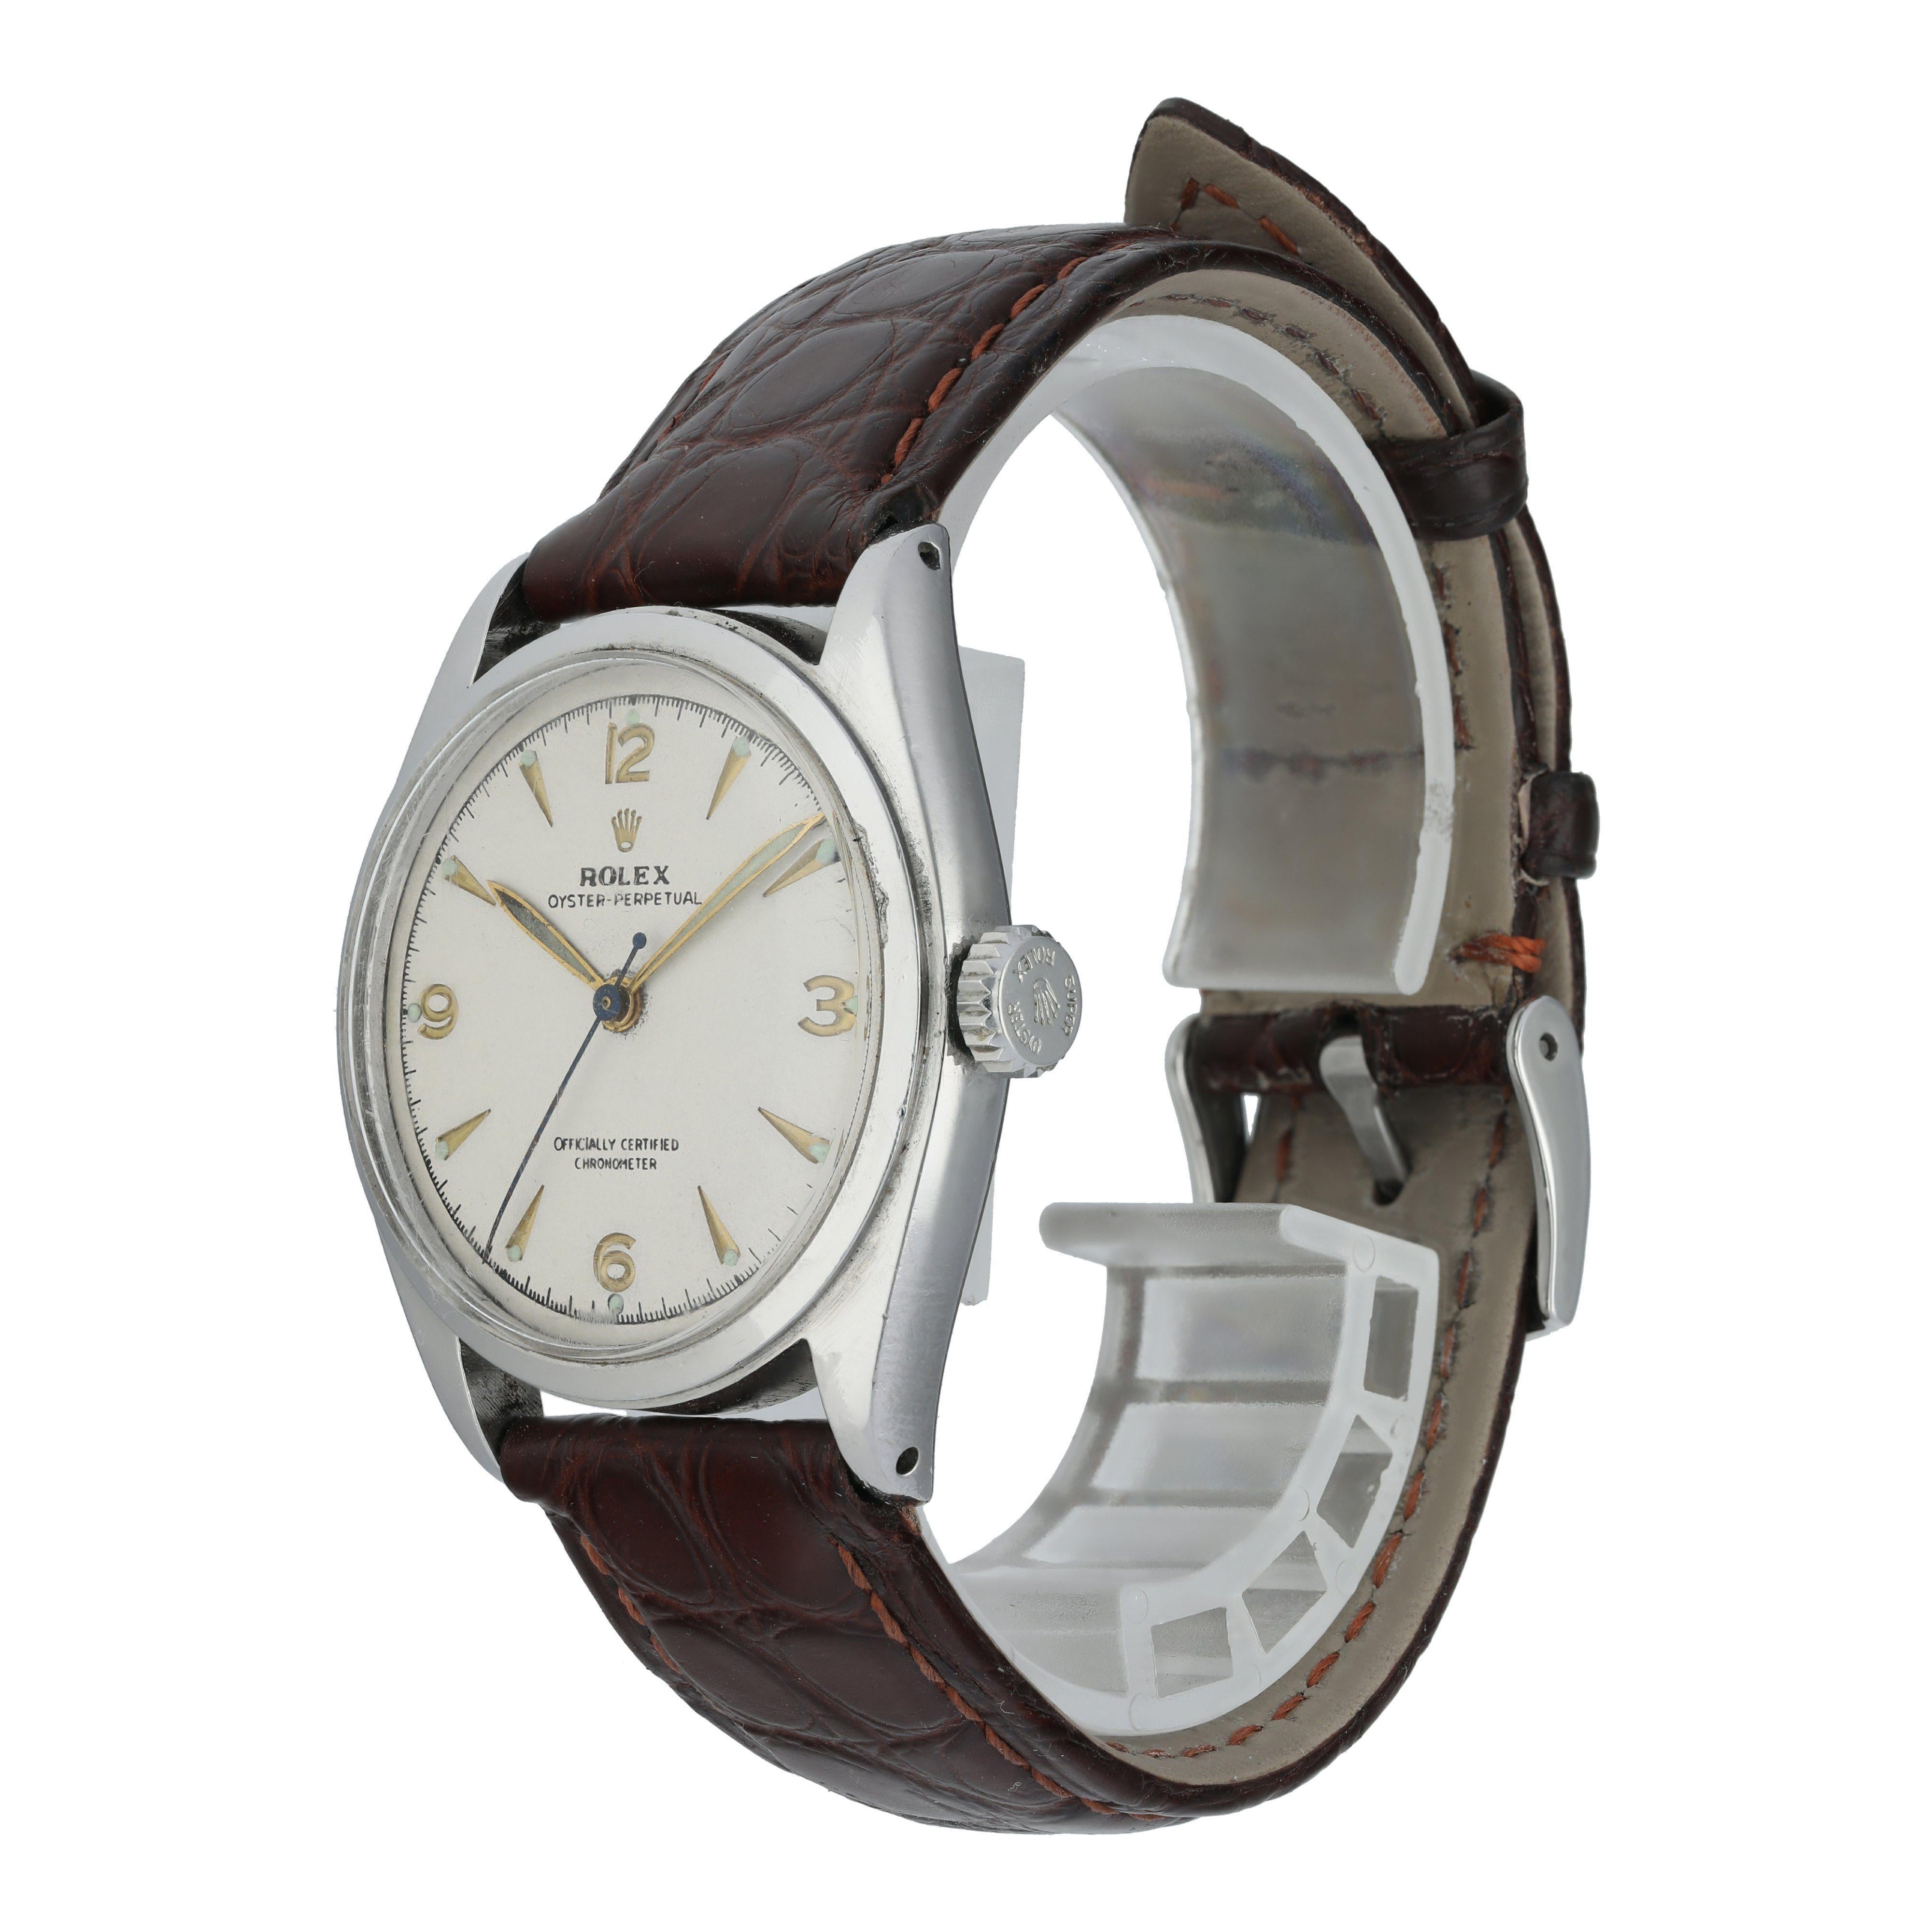 Rolex Oyster Perpetual 6084 men's Watch.
36mm stainless steel case with smooth bezel.
Offf-white patina dial with gold hands Arabic numeral hour markers.
Brown crocodile leather strap with original Rolex Buckle.
Will fit up to a 7.5-inch